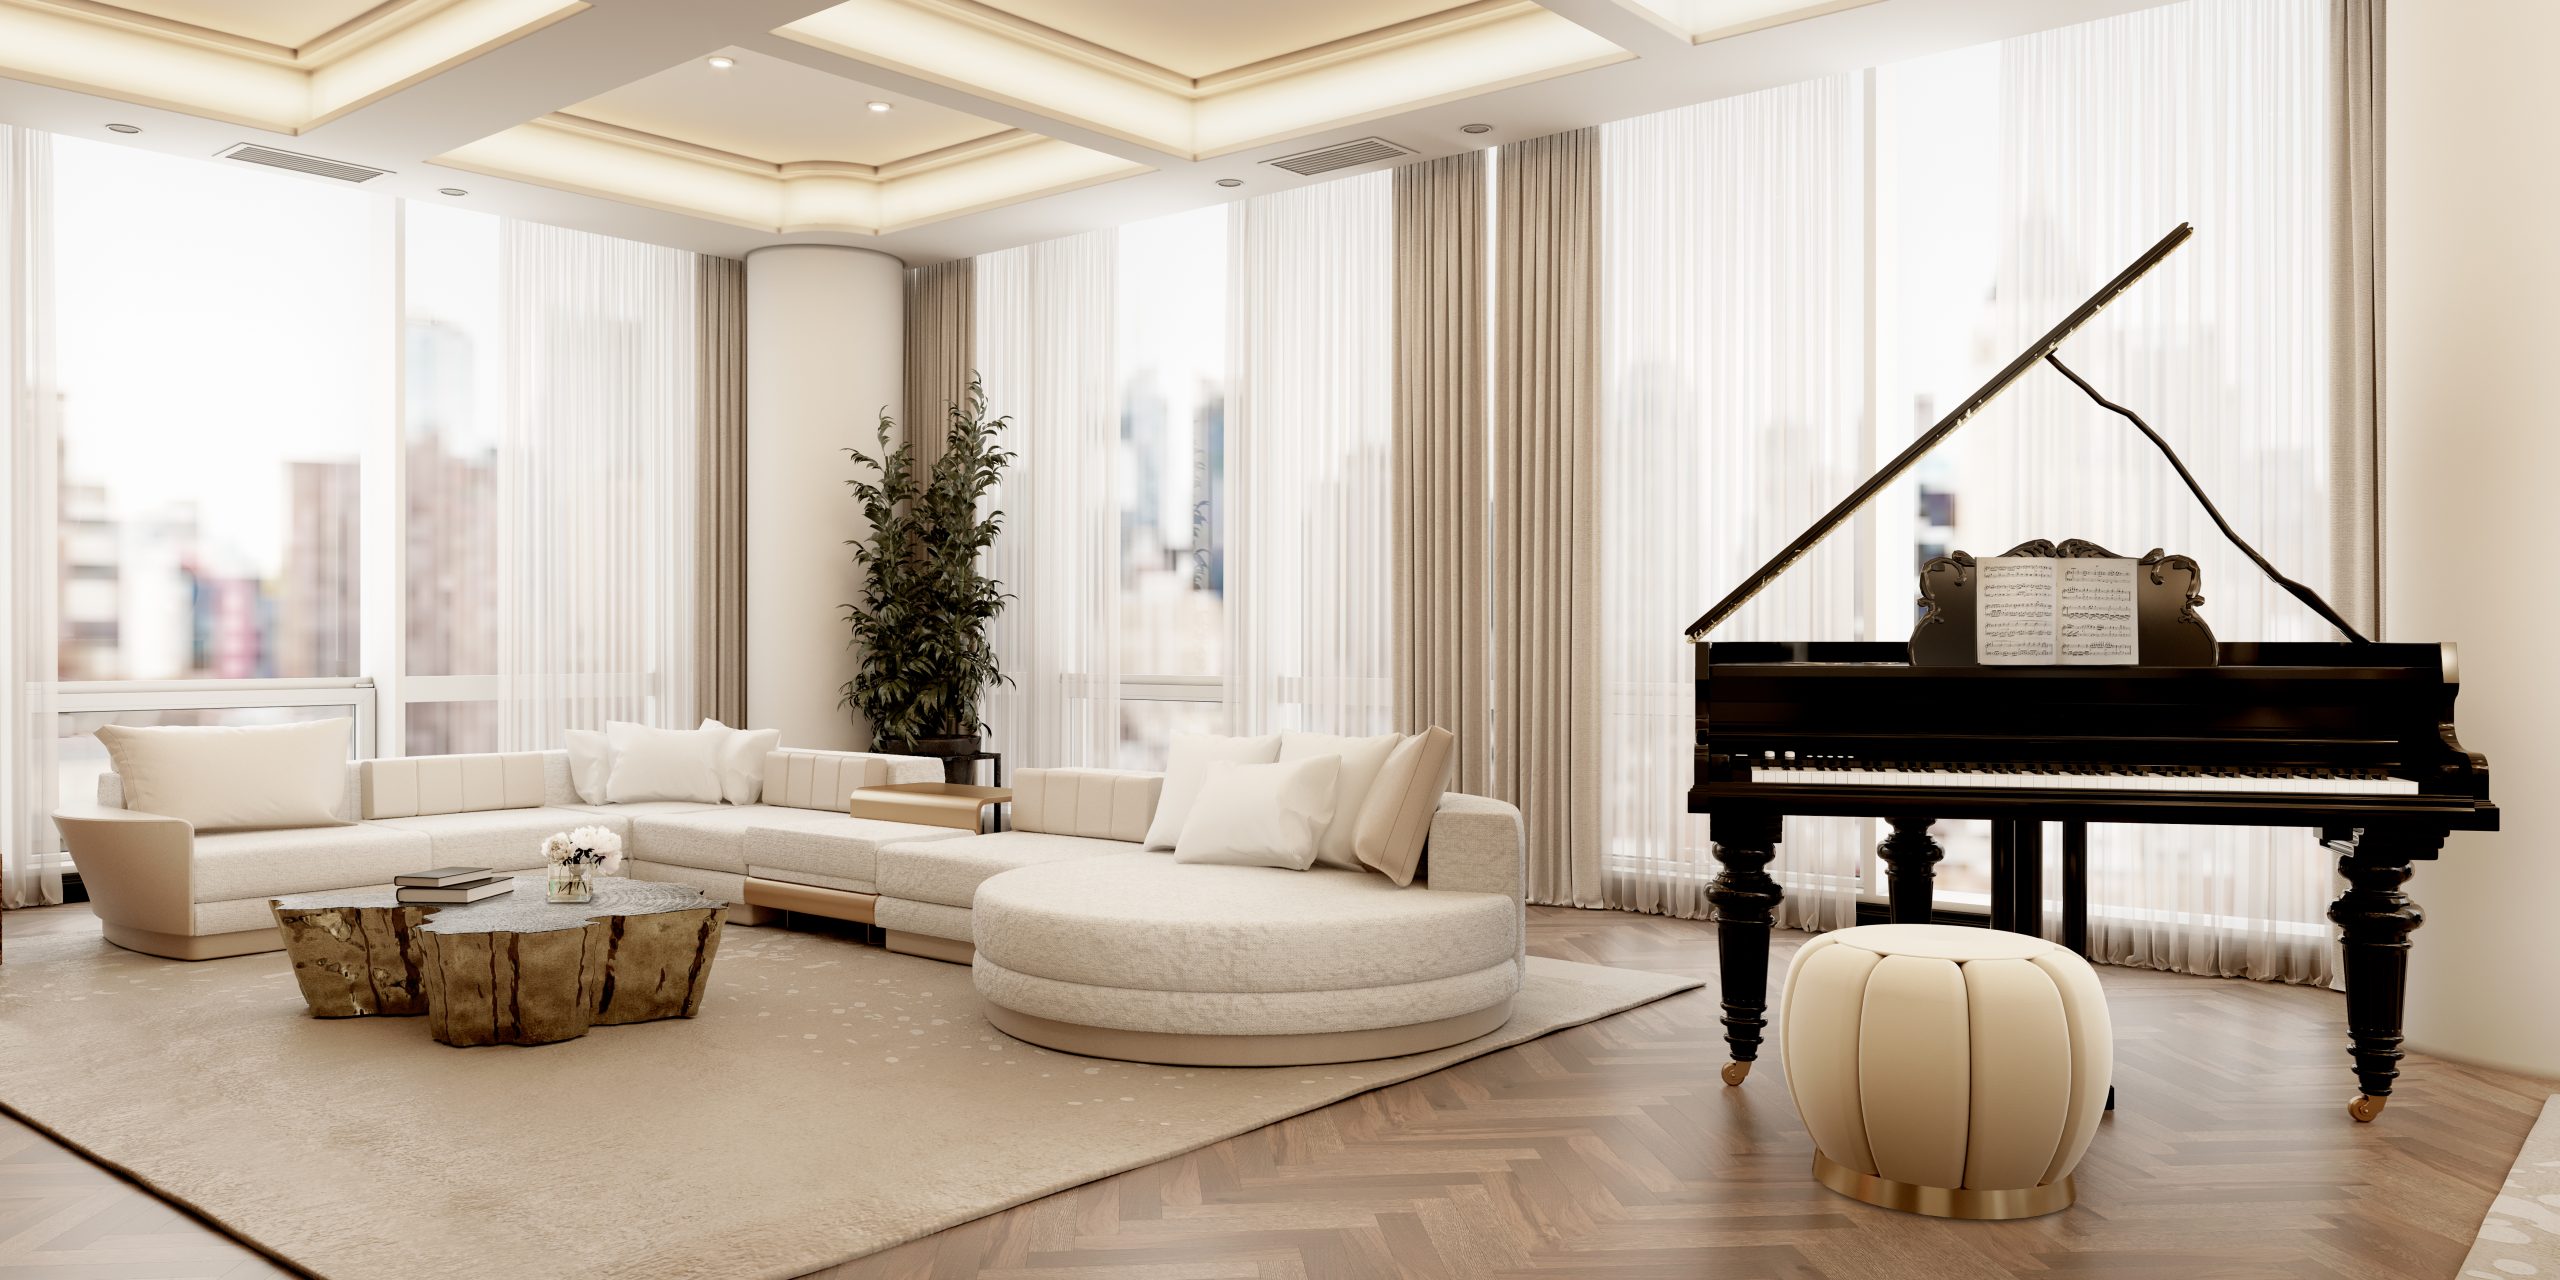 Get The Look Of These Luxury Living Rooms Ideas!